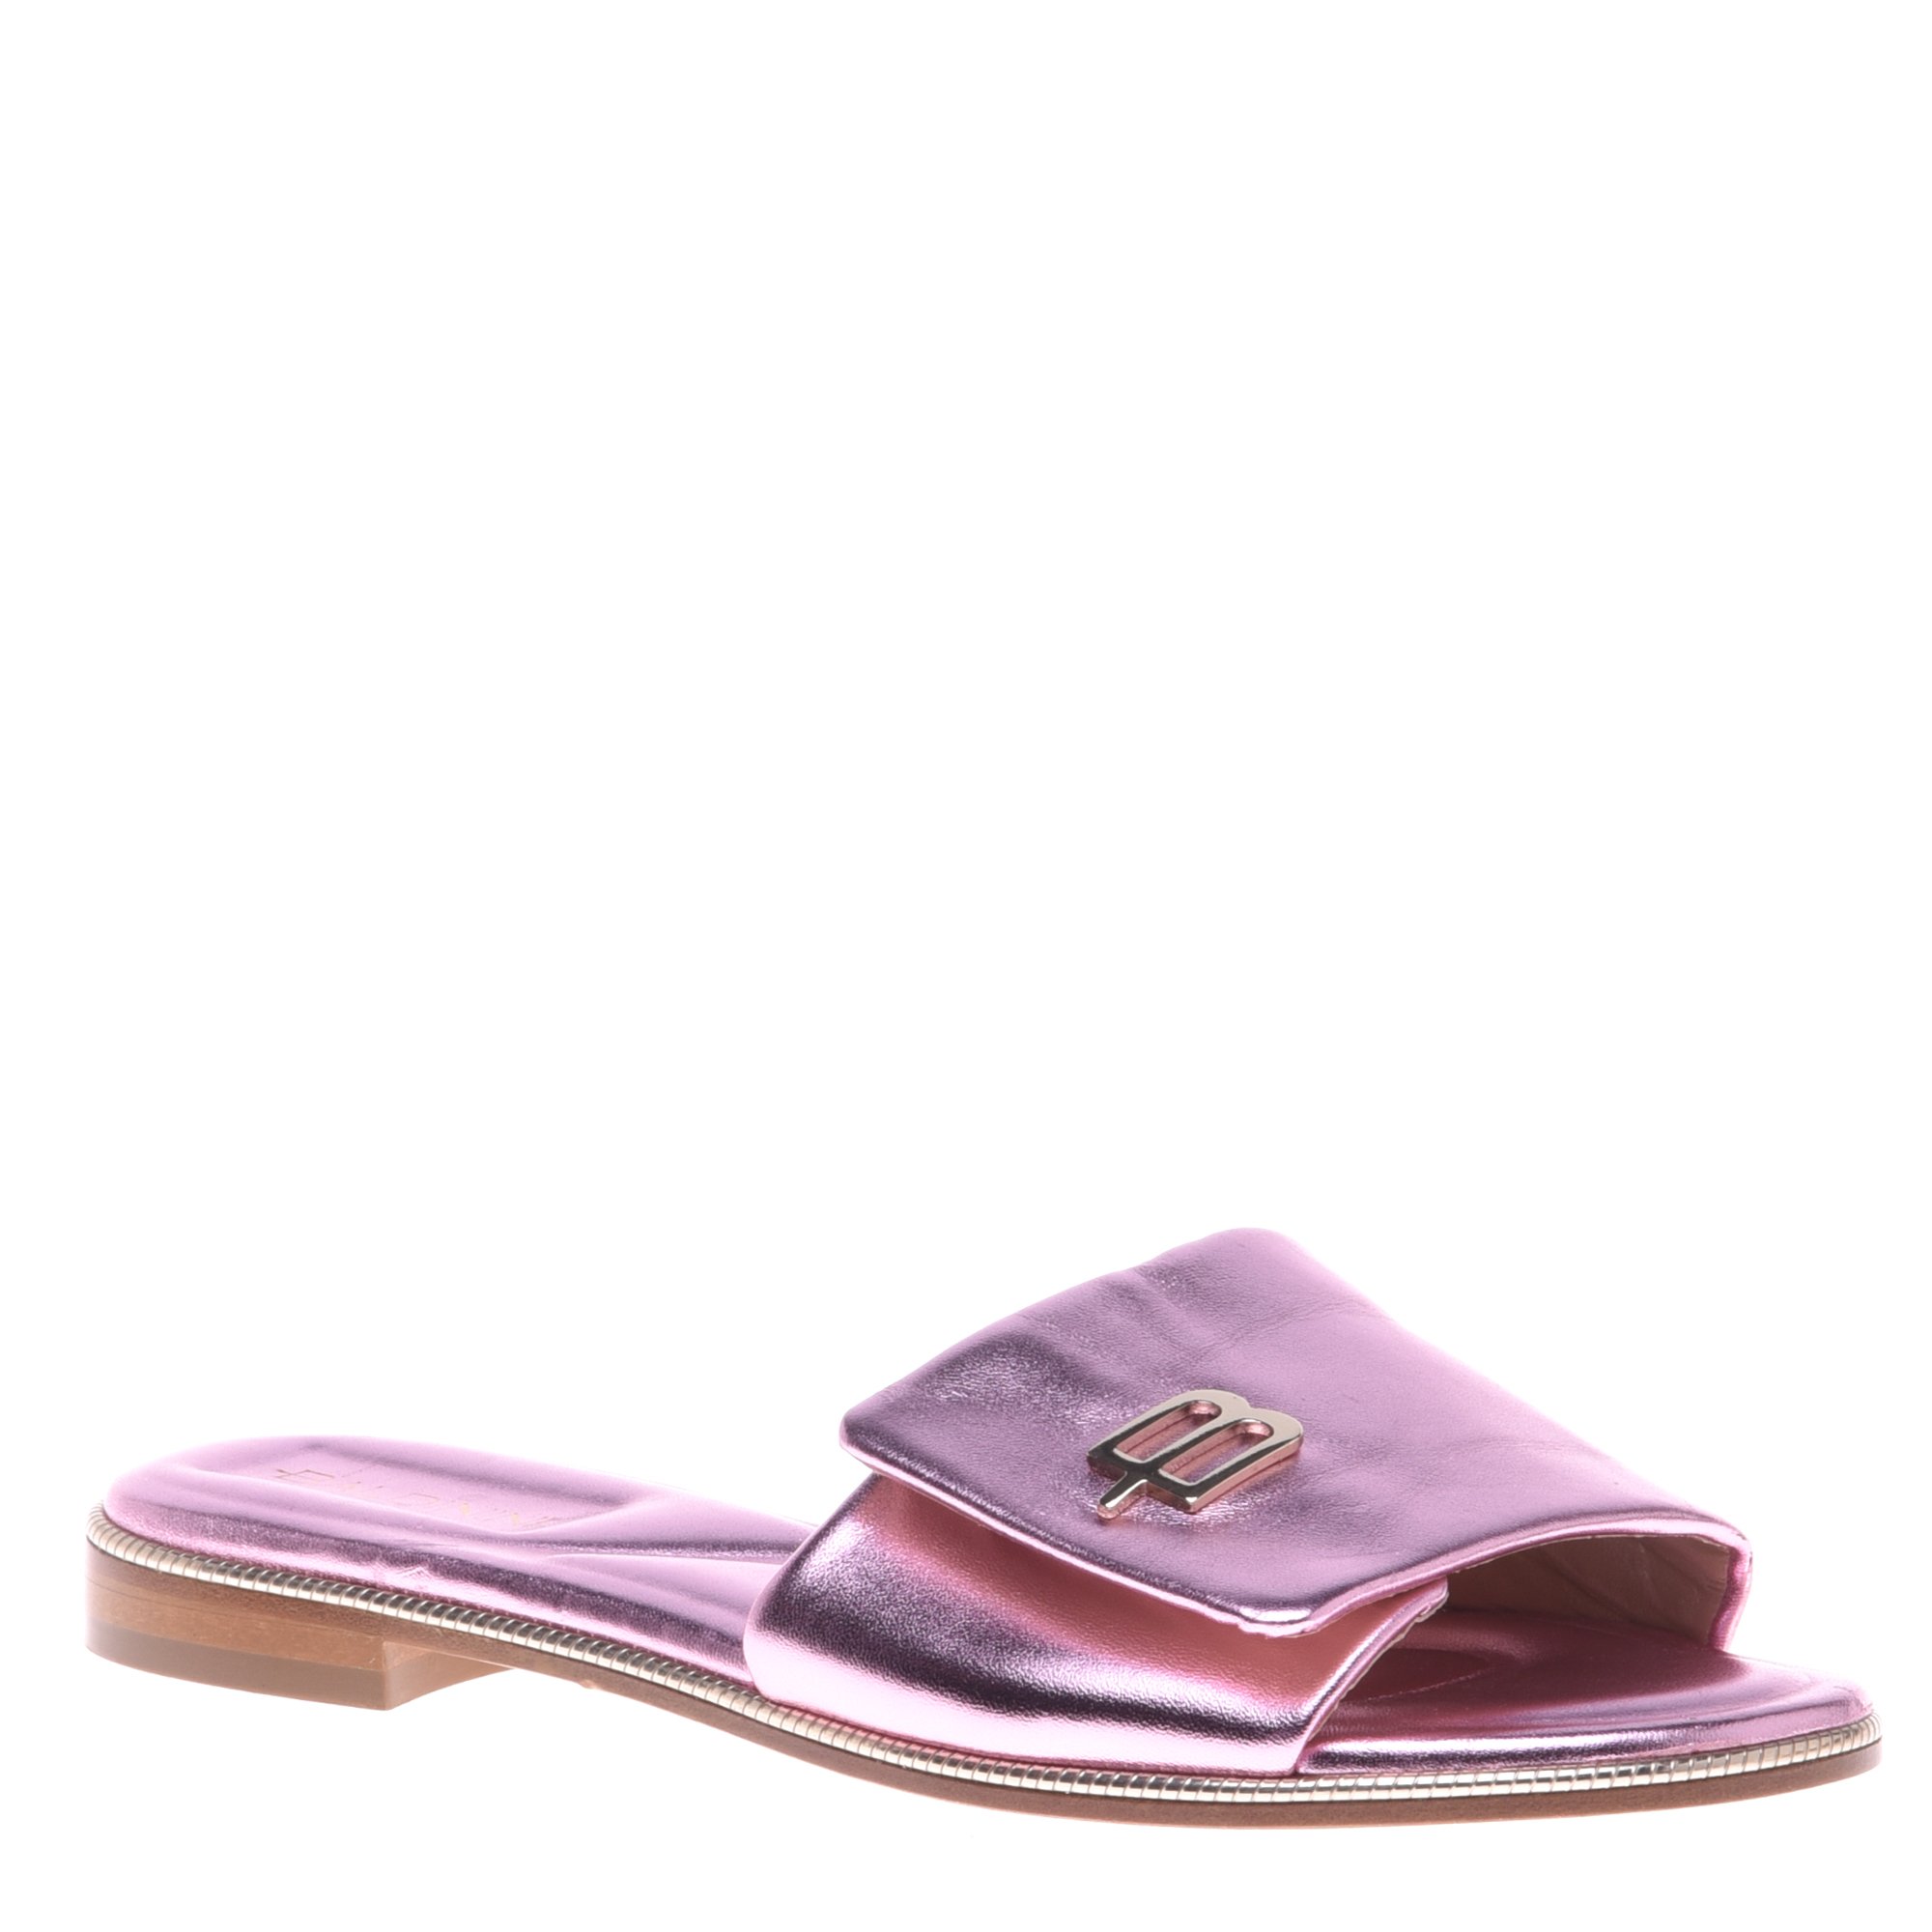 Slipper in pink nappa leather image